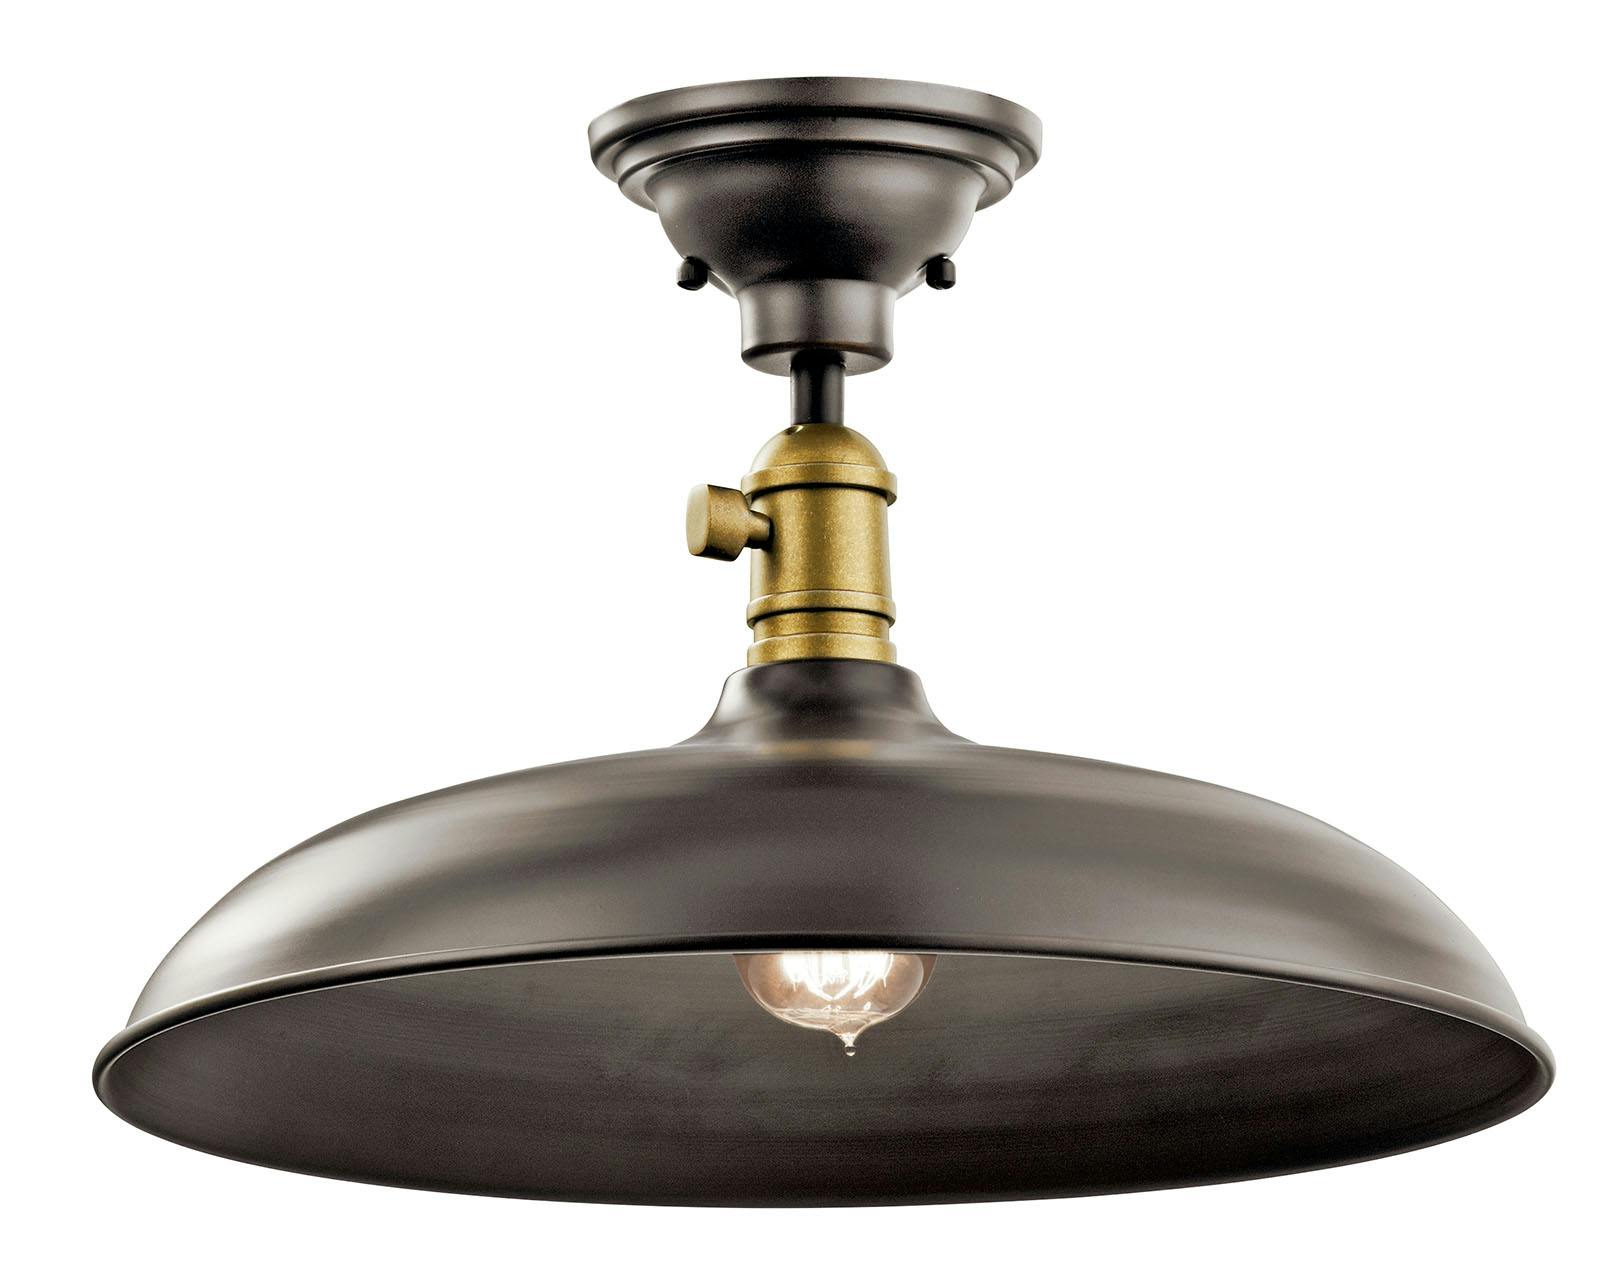 Cobson 8" Convertible Pendant Olde Bronze shown as a semi-flush on a white background